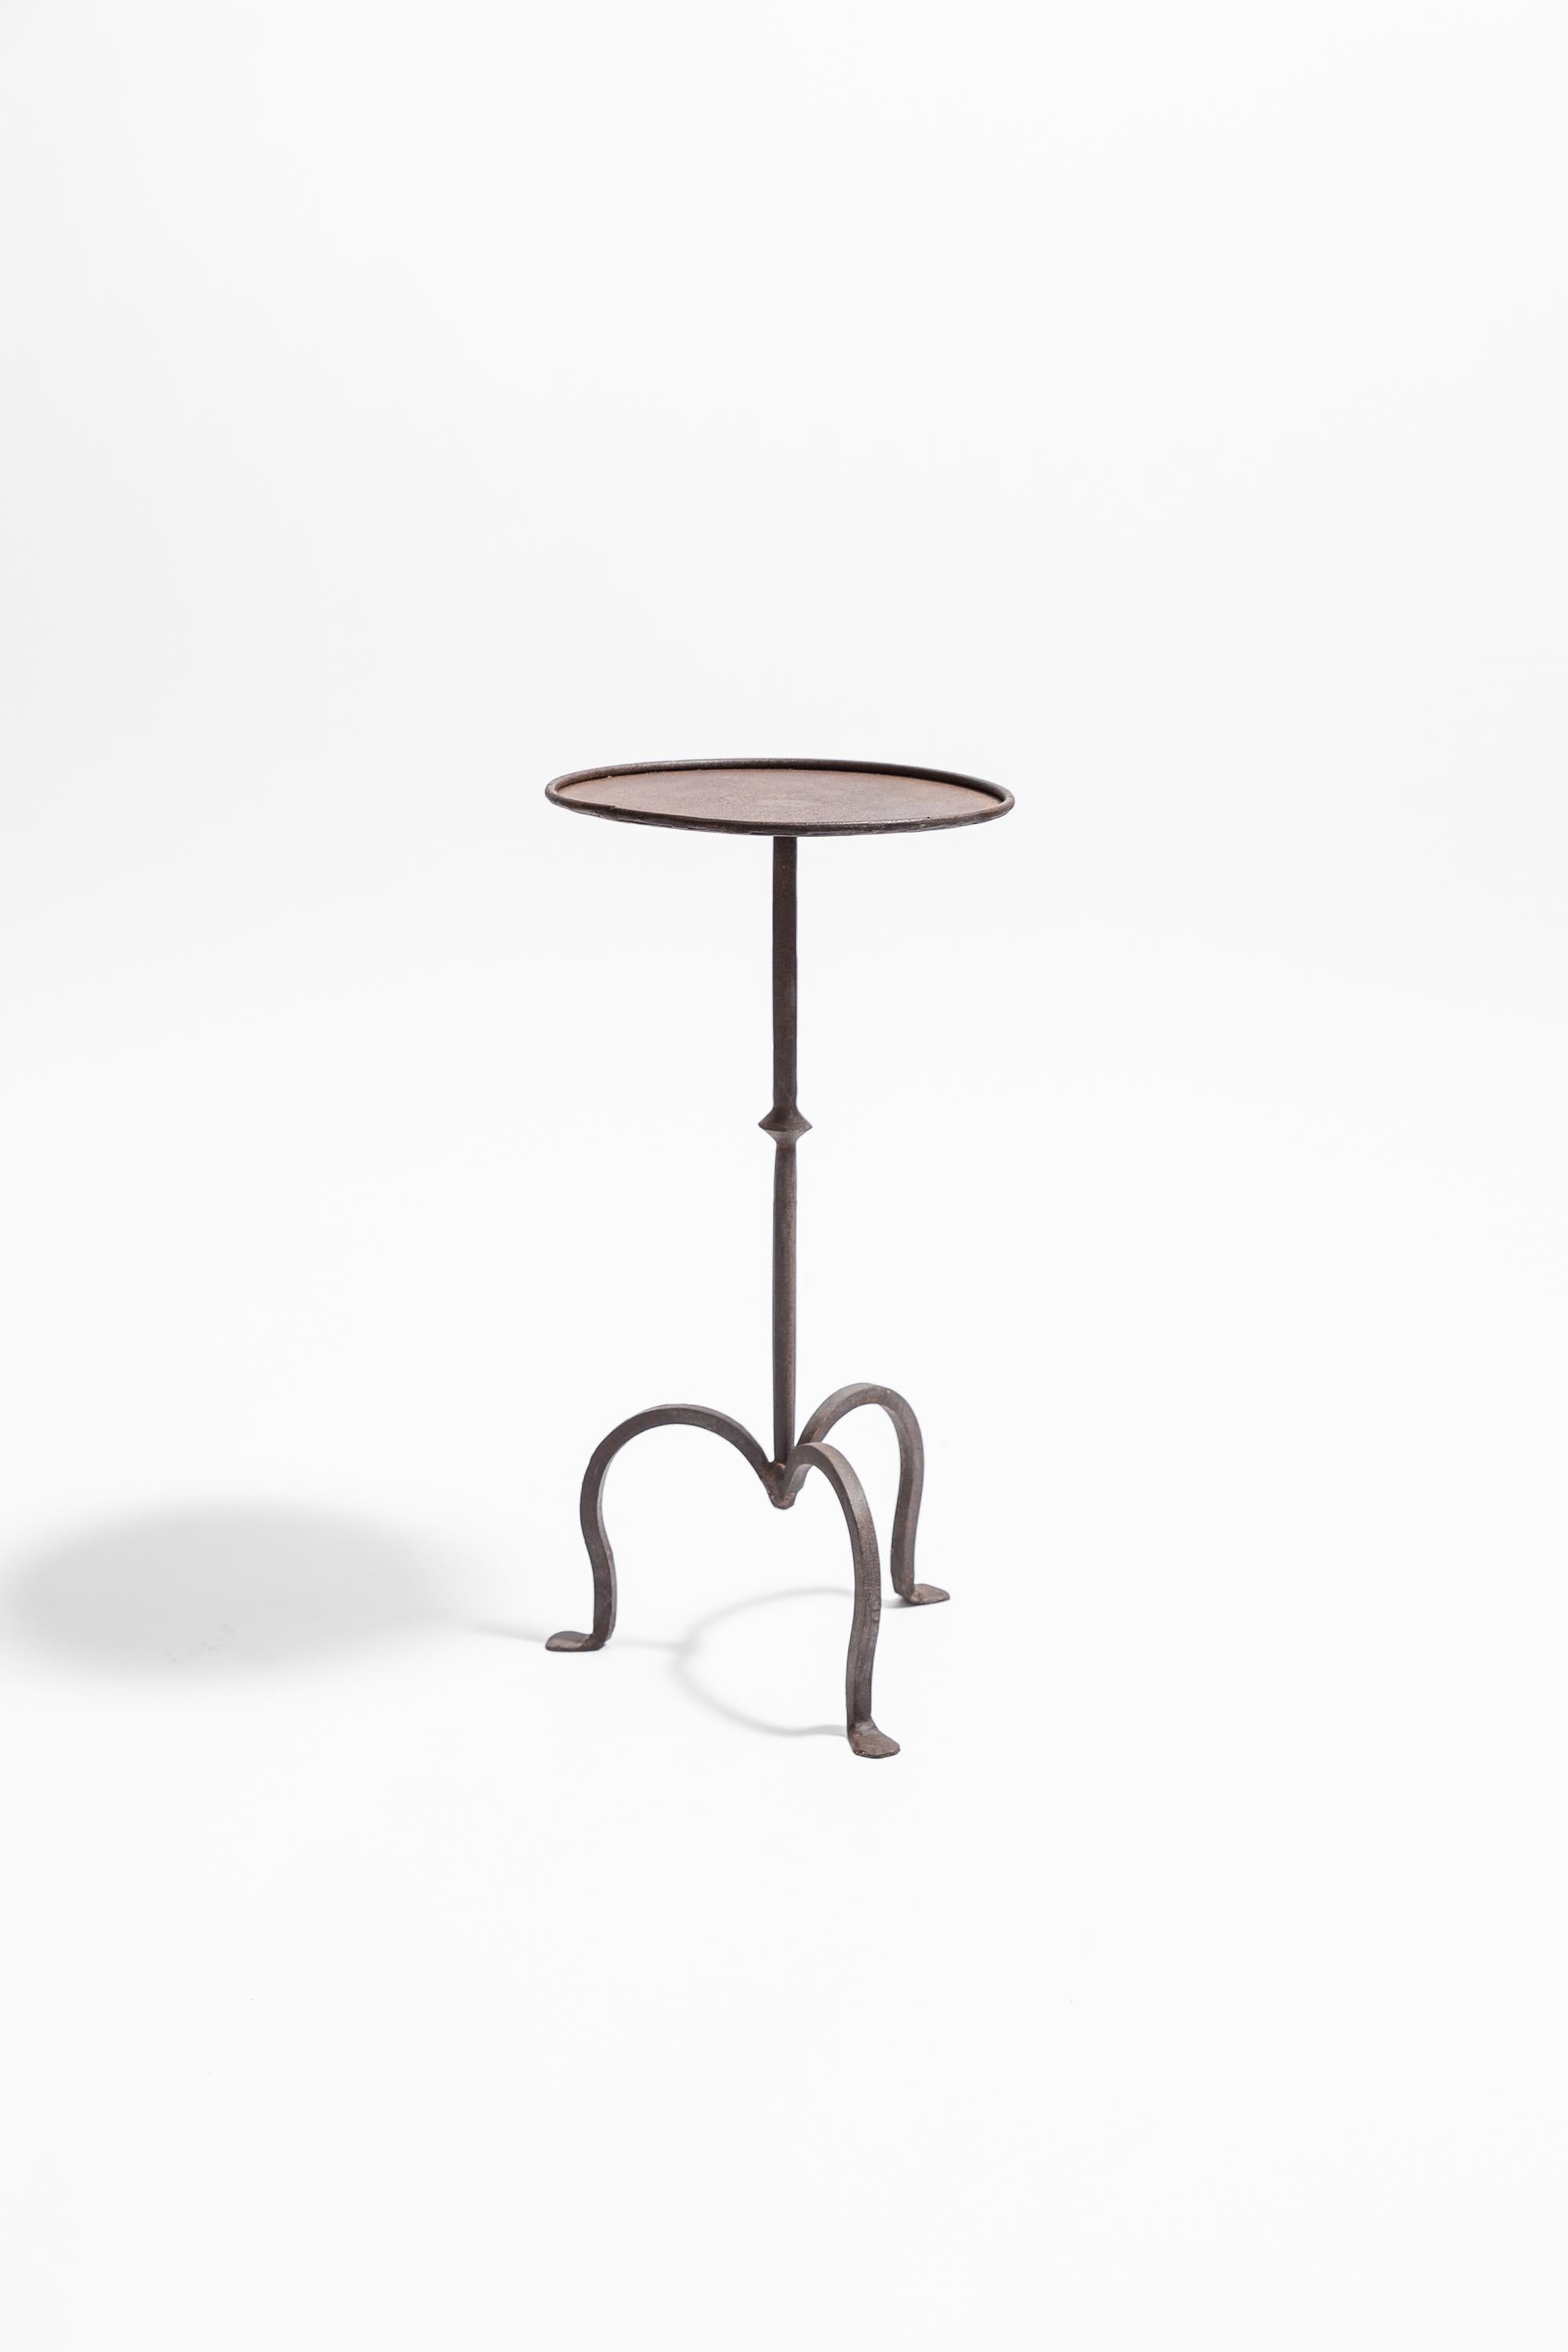 A wrought iron martini table, hand made in England to a 1940s original design. 500

Shown here finished with a natural bronze patina. Available in bronze or black finishes.

Large: 31 cm diameter top, 56 high 

From stock or made to order on a c. 4